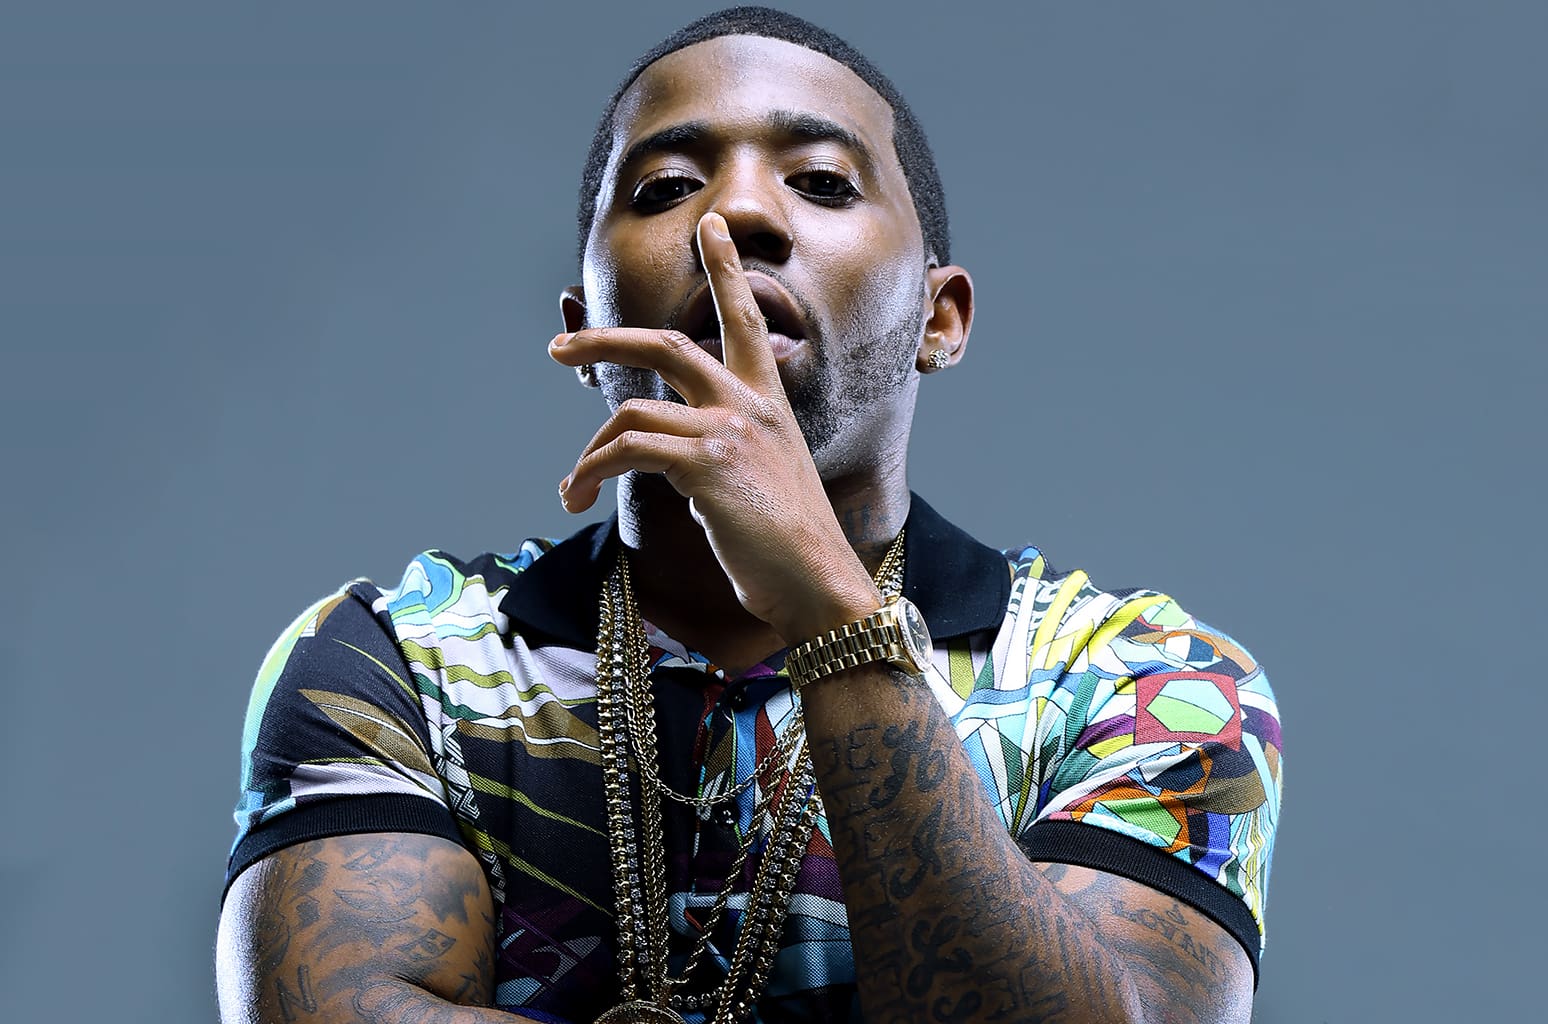 YFN Lucci Gets Slammed For His Latest Addition Following Reginae Carter Split - Check Out His Video